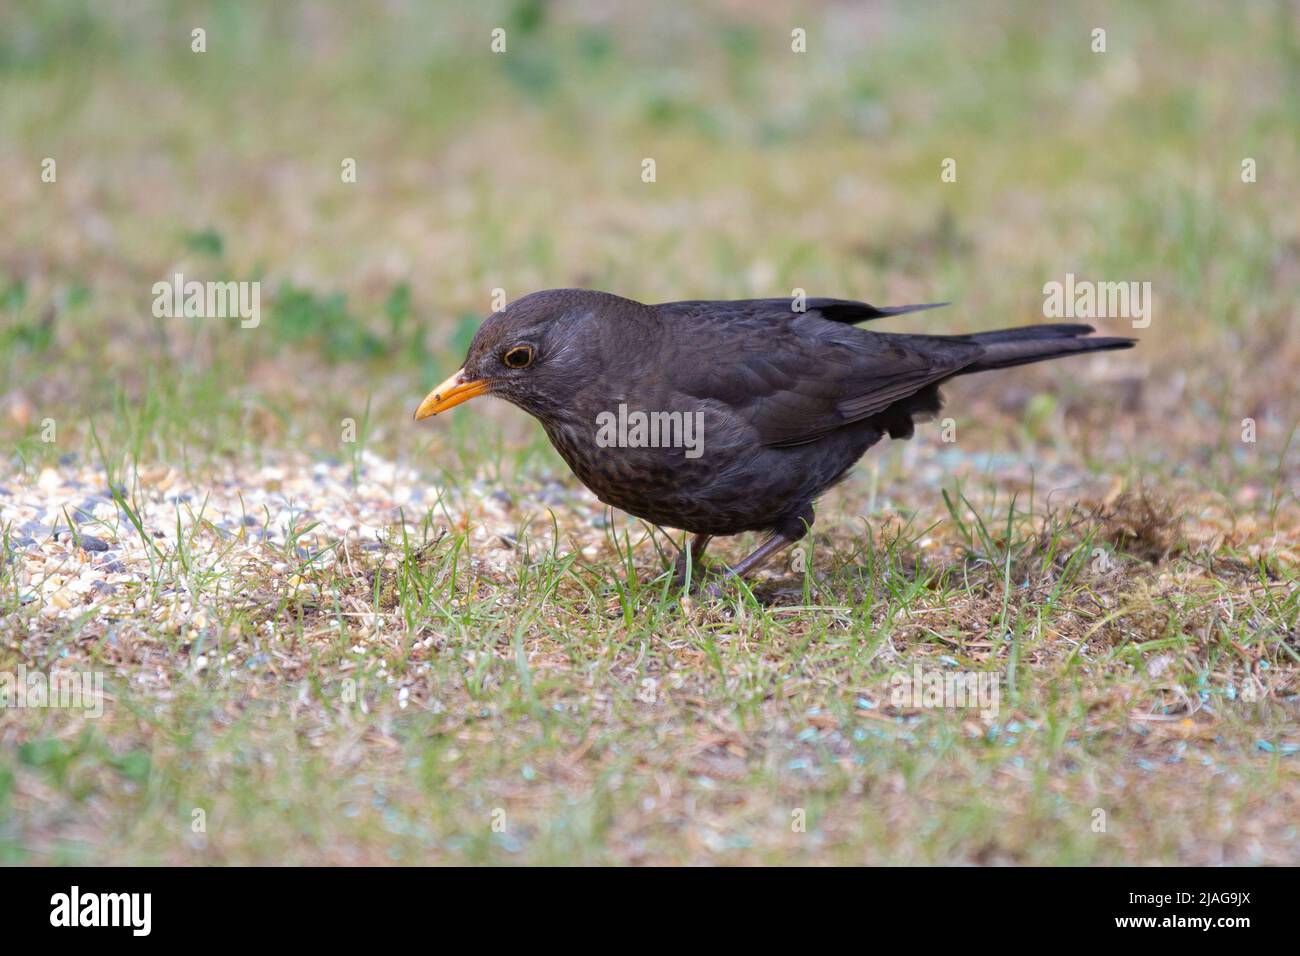 foraging blackbird, Turdus merula, male on the ground in the grass with orange bill and dark to black plumage Stock Photo